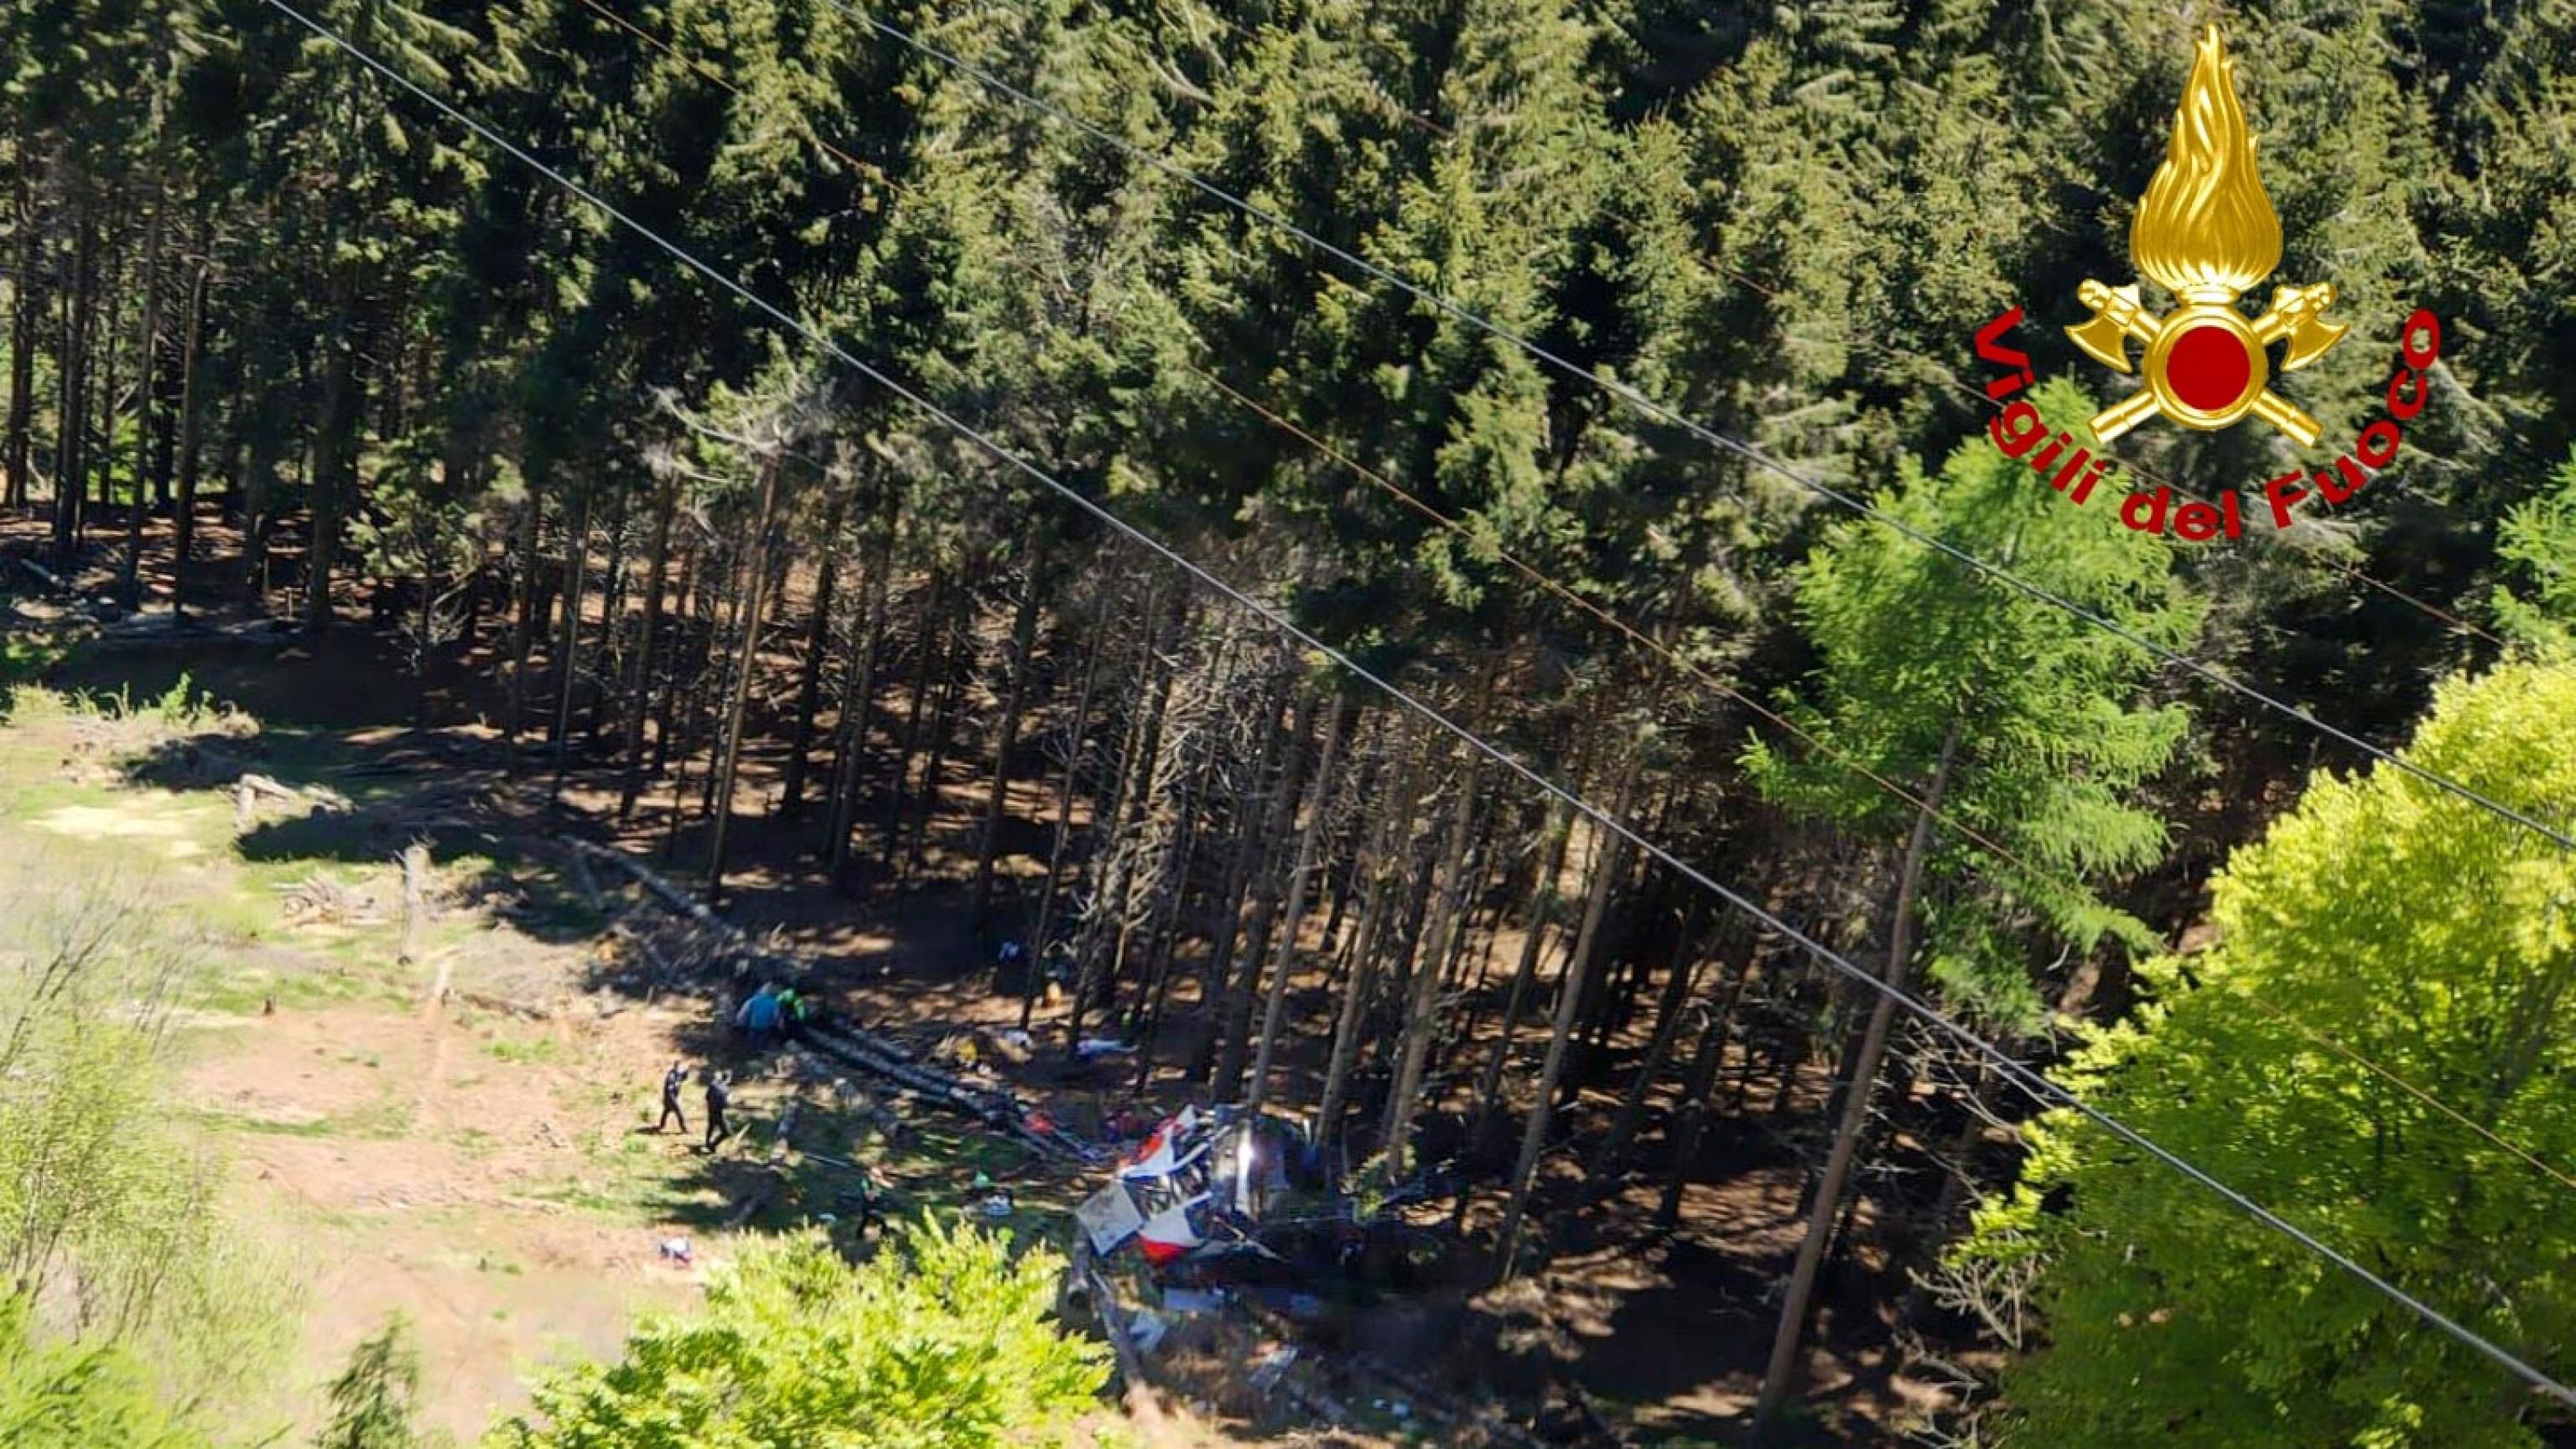 Stresa (Italy), 23/05/2021.- A handout photo made available by Italian Fire and Rescue Service shows Rescuers at work at the area of the cable car accident, near Lake Maggiore, northern Italy, 23 May 2021. The cable car that connects Stresa with Mottarone has crashed, claiming 14 lives, according to the latest toll. The accident has been caused by the failure of a rope, in the highest part of the route which, starting from Lake Maggiore reaches an altitude of 1,491 meters. (Incendio, Italia) EFE/EPA/ITALIAN FIRE AND RESCUE SERVICE / HANDOUT HANDOUT EDITORIAL USE ONLY/NO SALES
